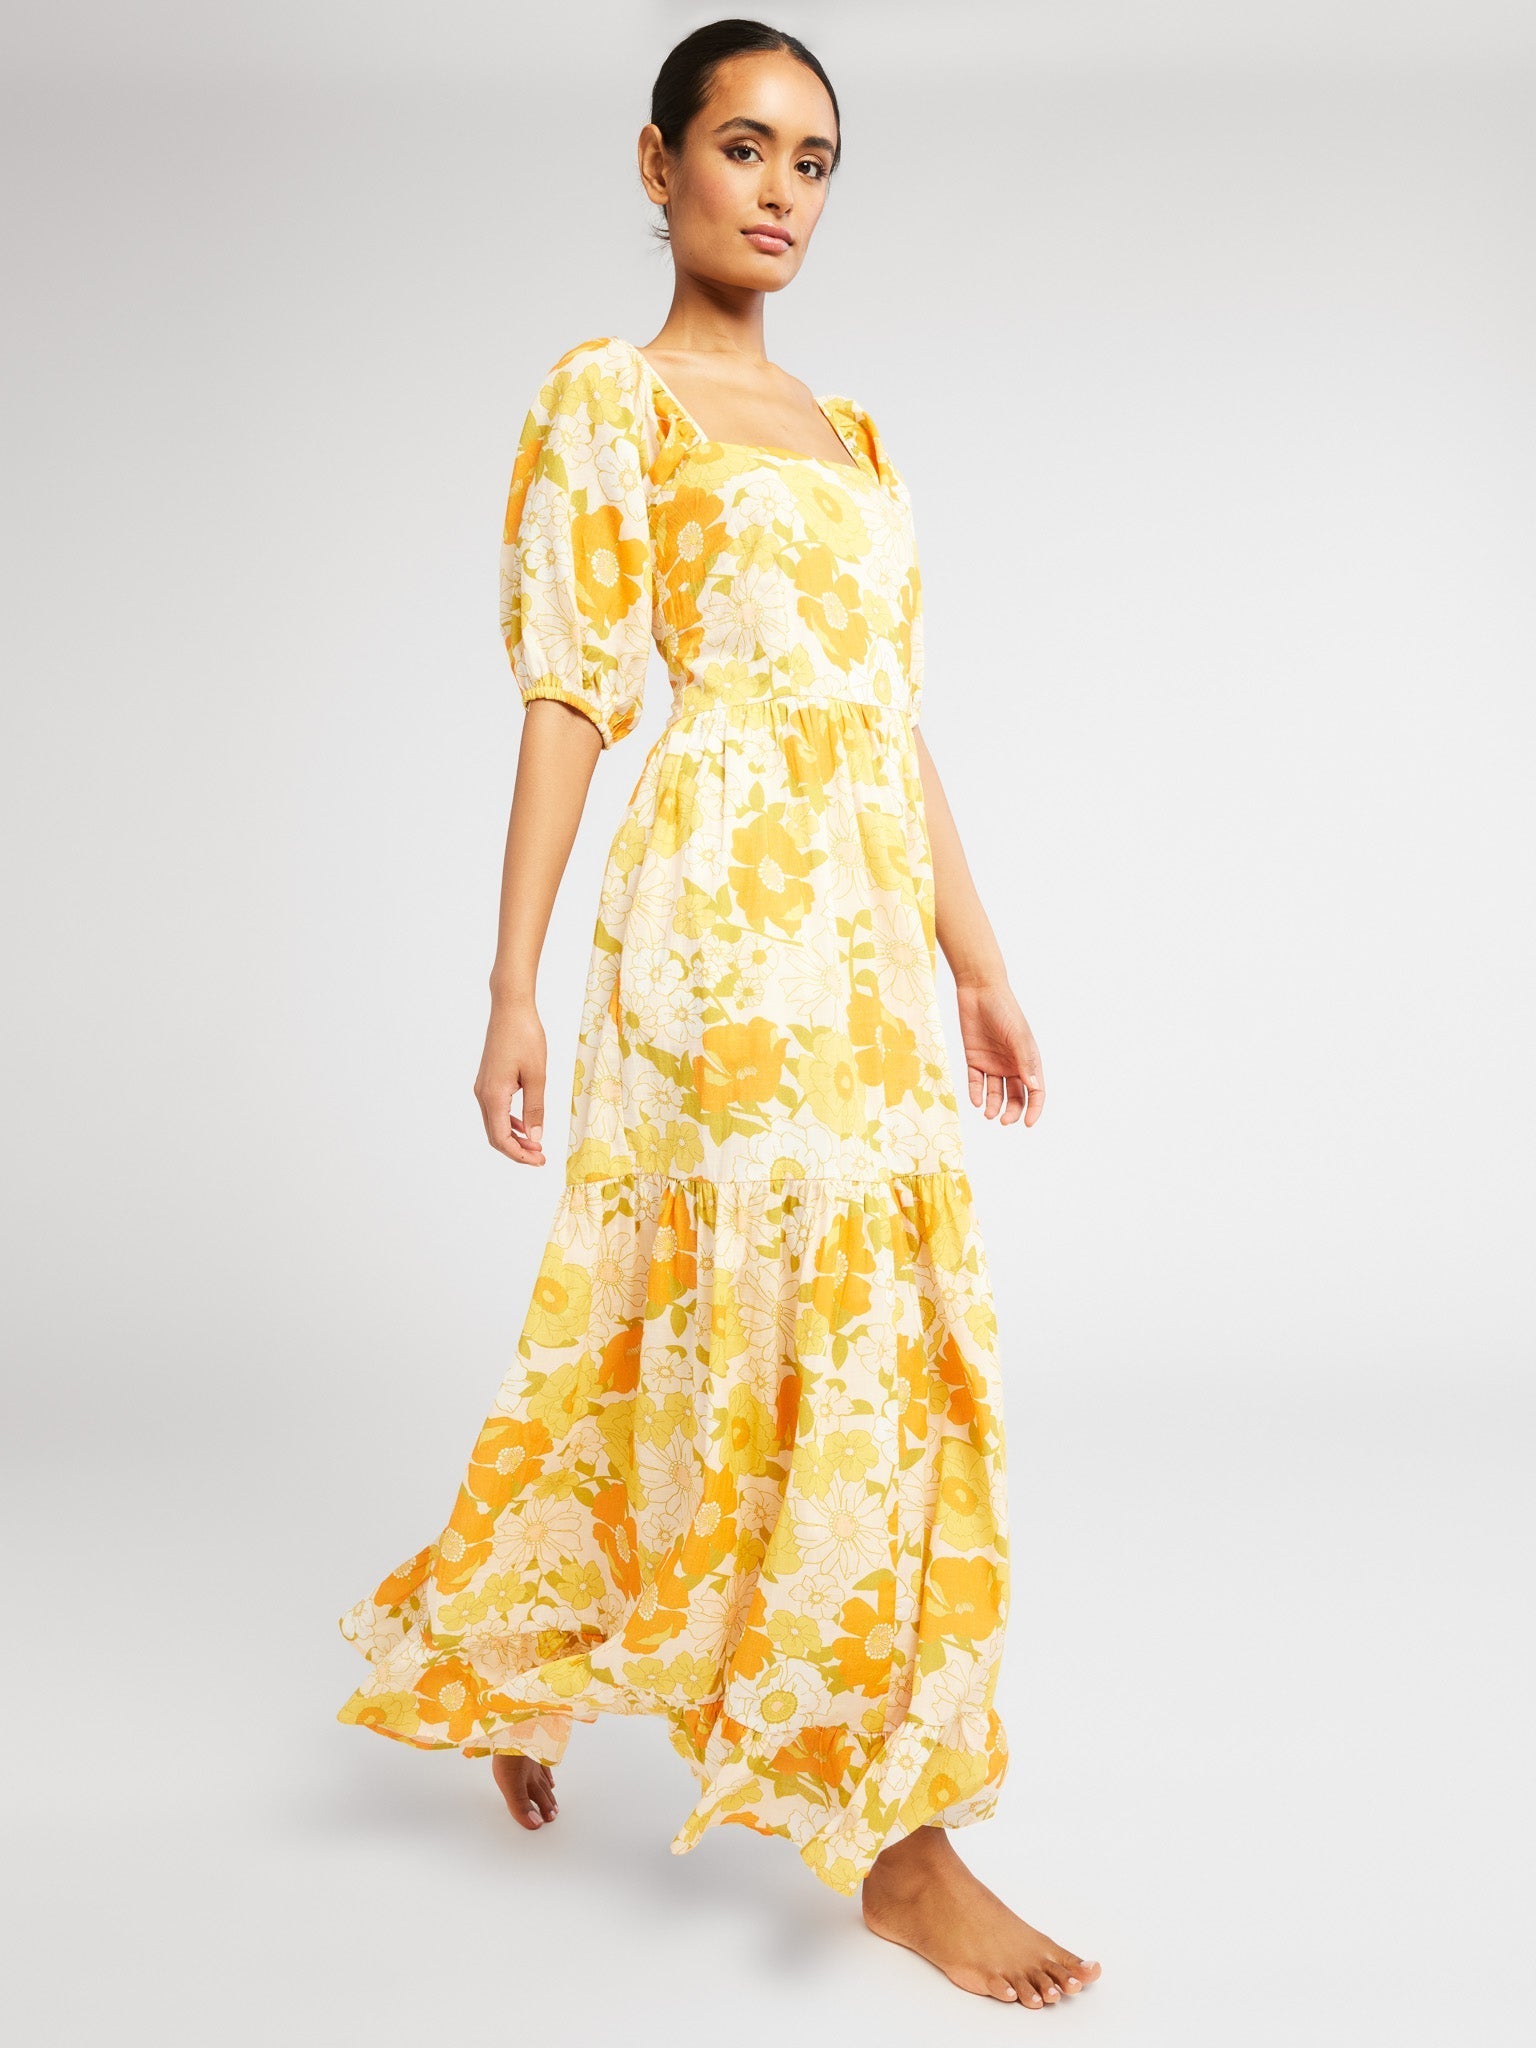 MILLE Clothing Manon Dress in Retro Floral